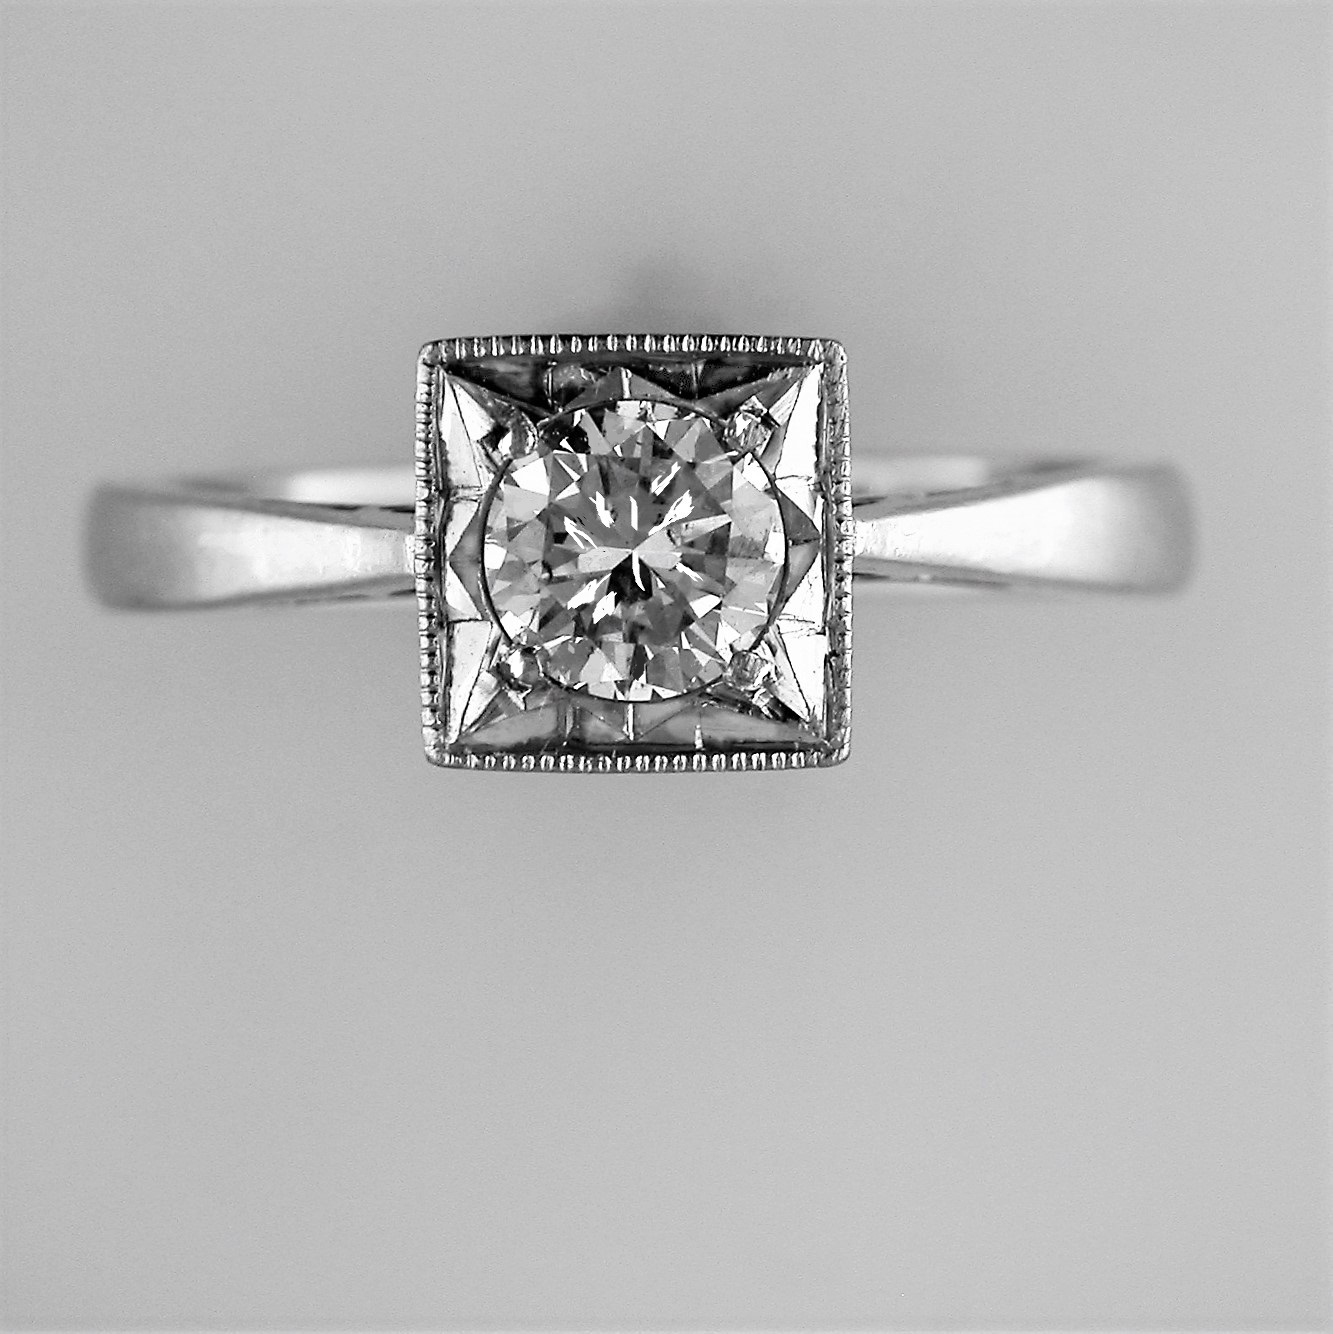 A "Fully Restored" Brilliant Round Diamond Panel Ring - Image 2 of 3